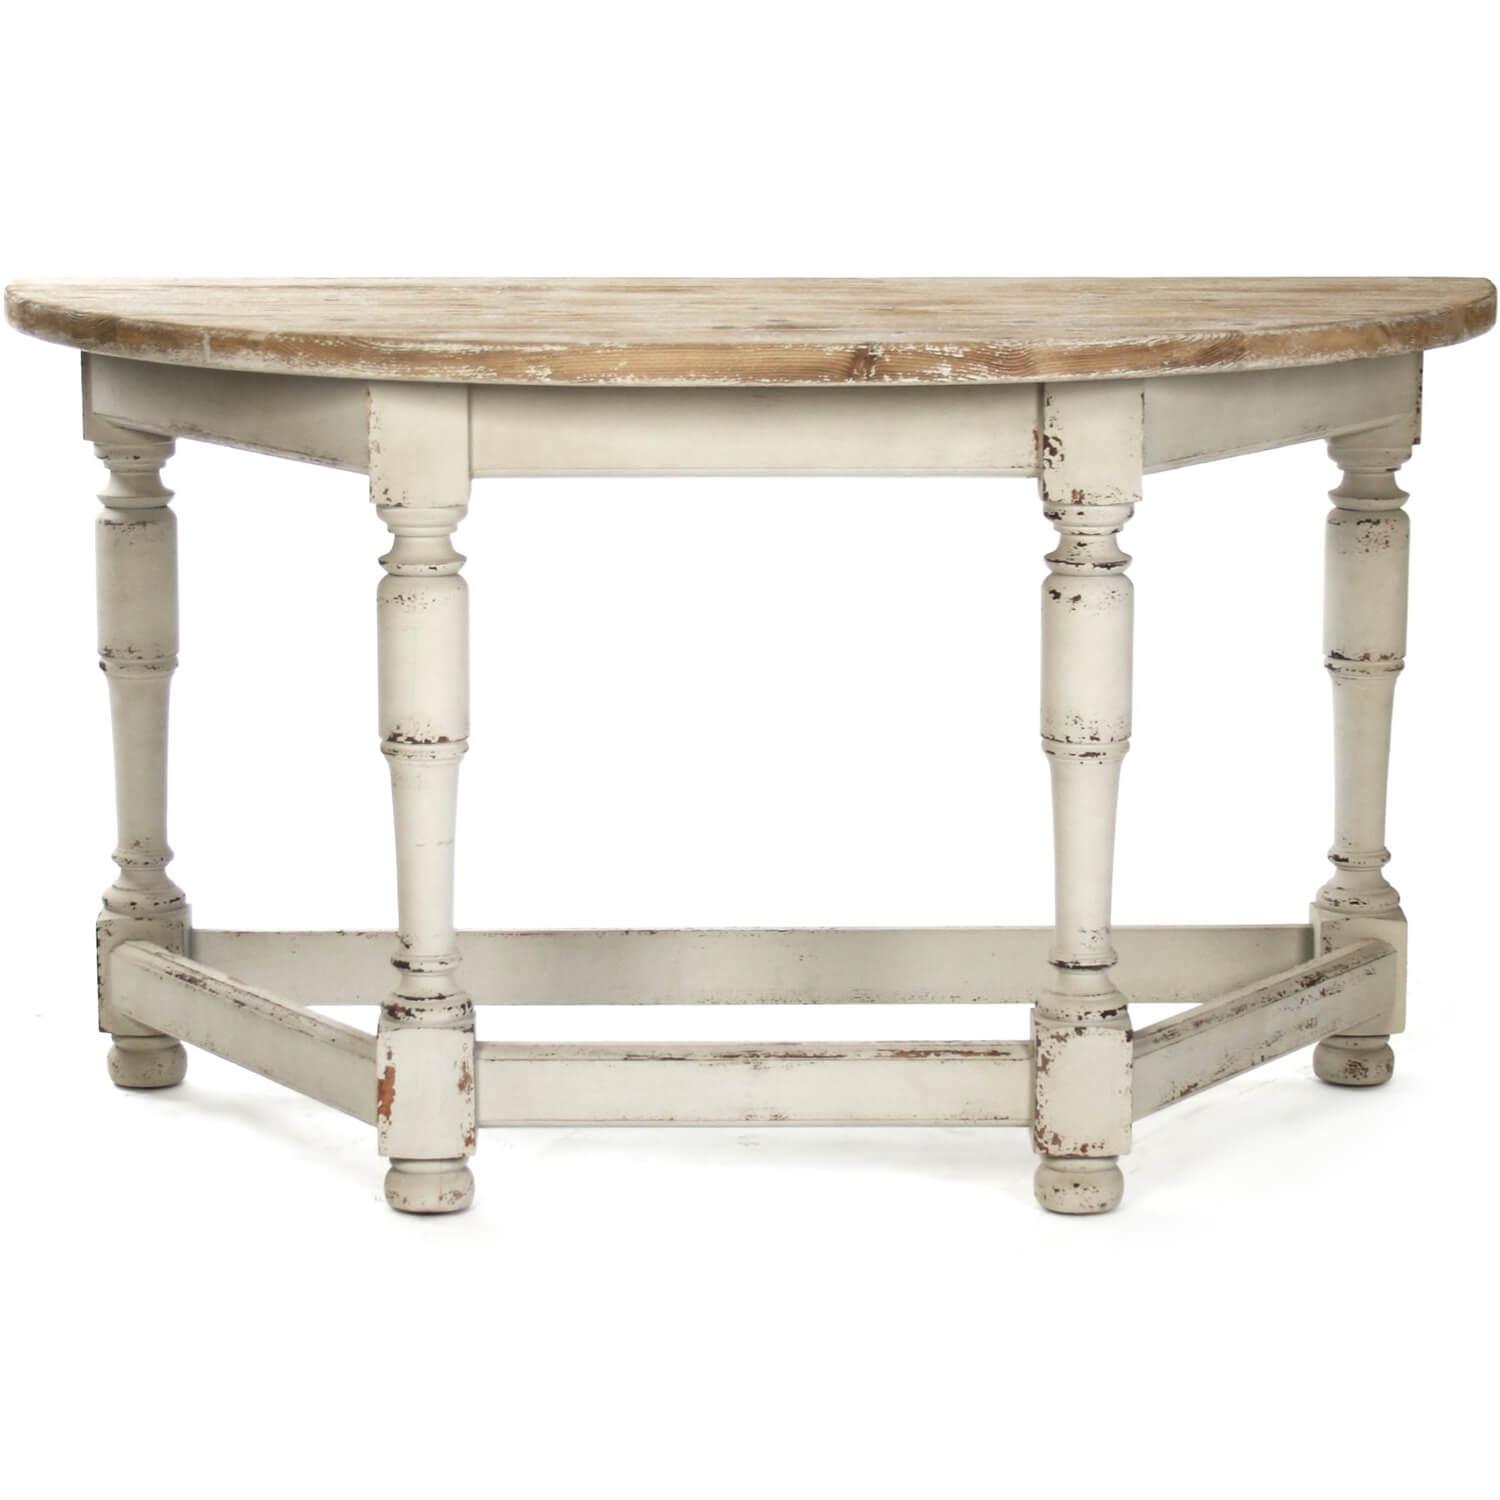 French Country Demilune Table - Belle Escape